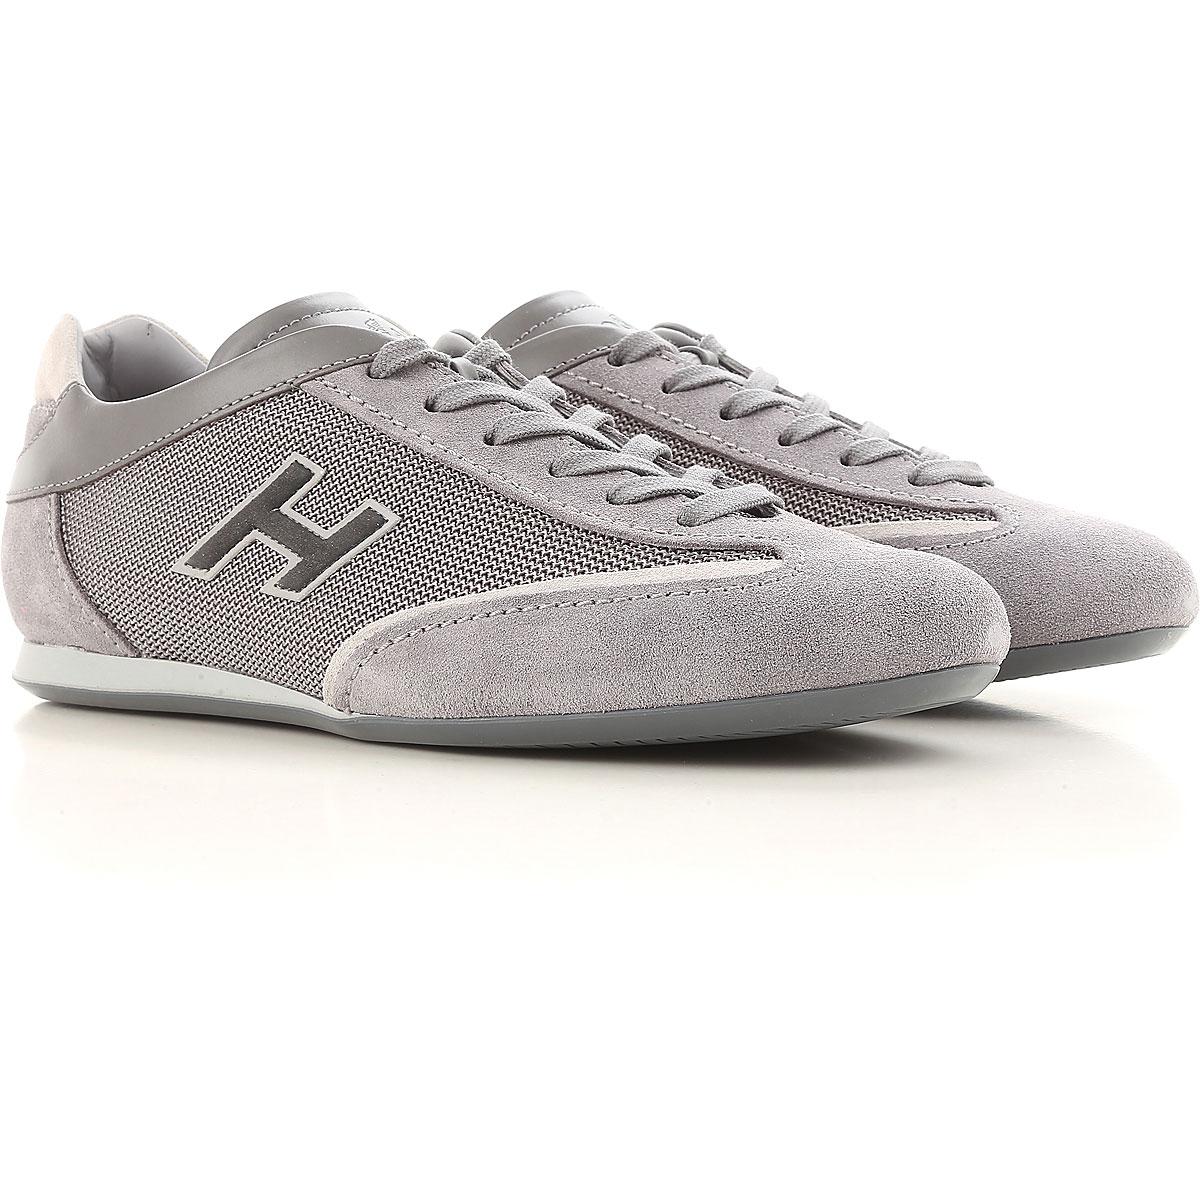 Hogan Lace Sneakers For Men On Sale in Grey (Gray) for Men - Lyst